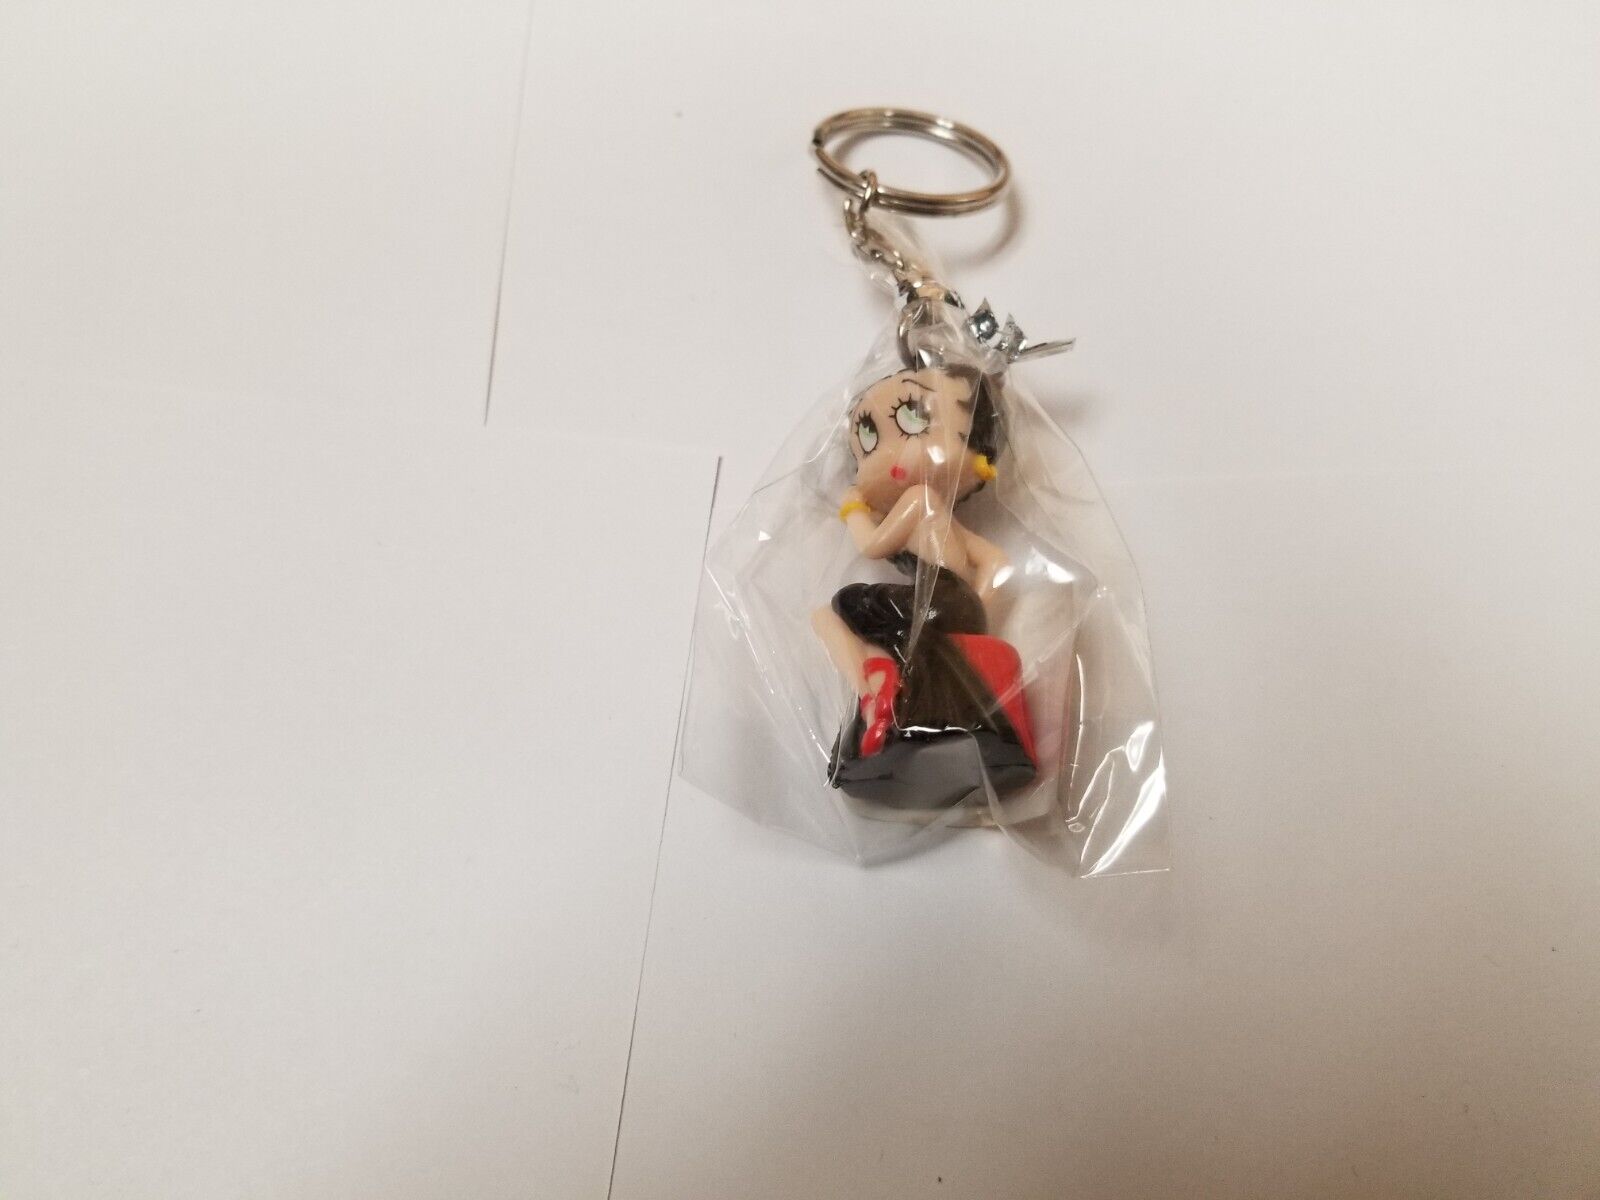  Betty Boop Key Chains new